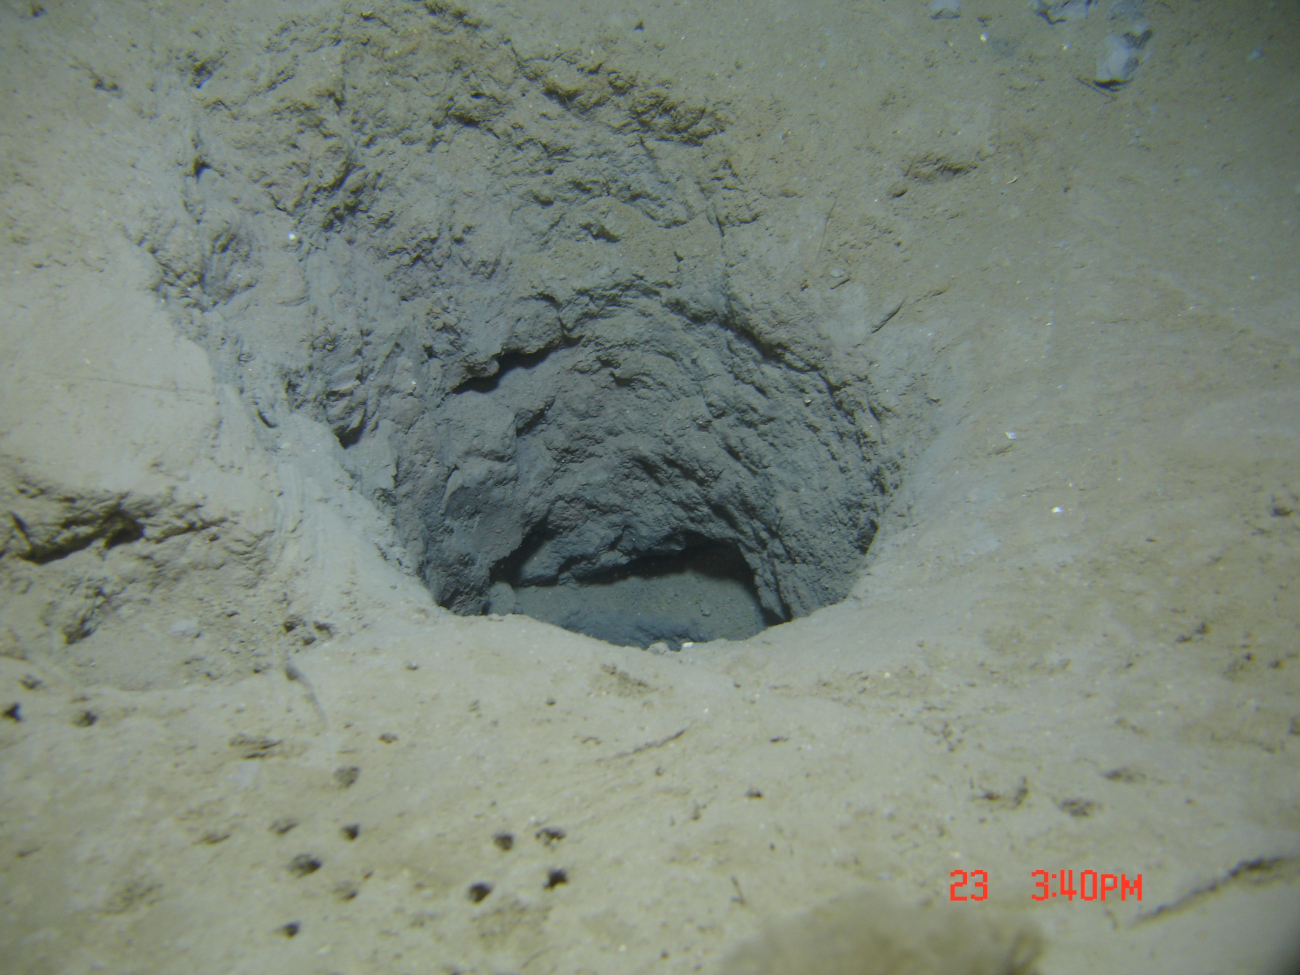 Must be the hole that the clumpy mudstone in expn1615 and expn1616 wereexcavated from